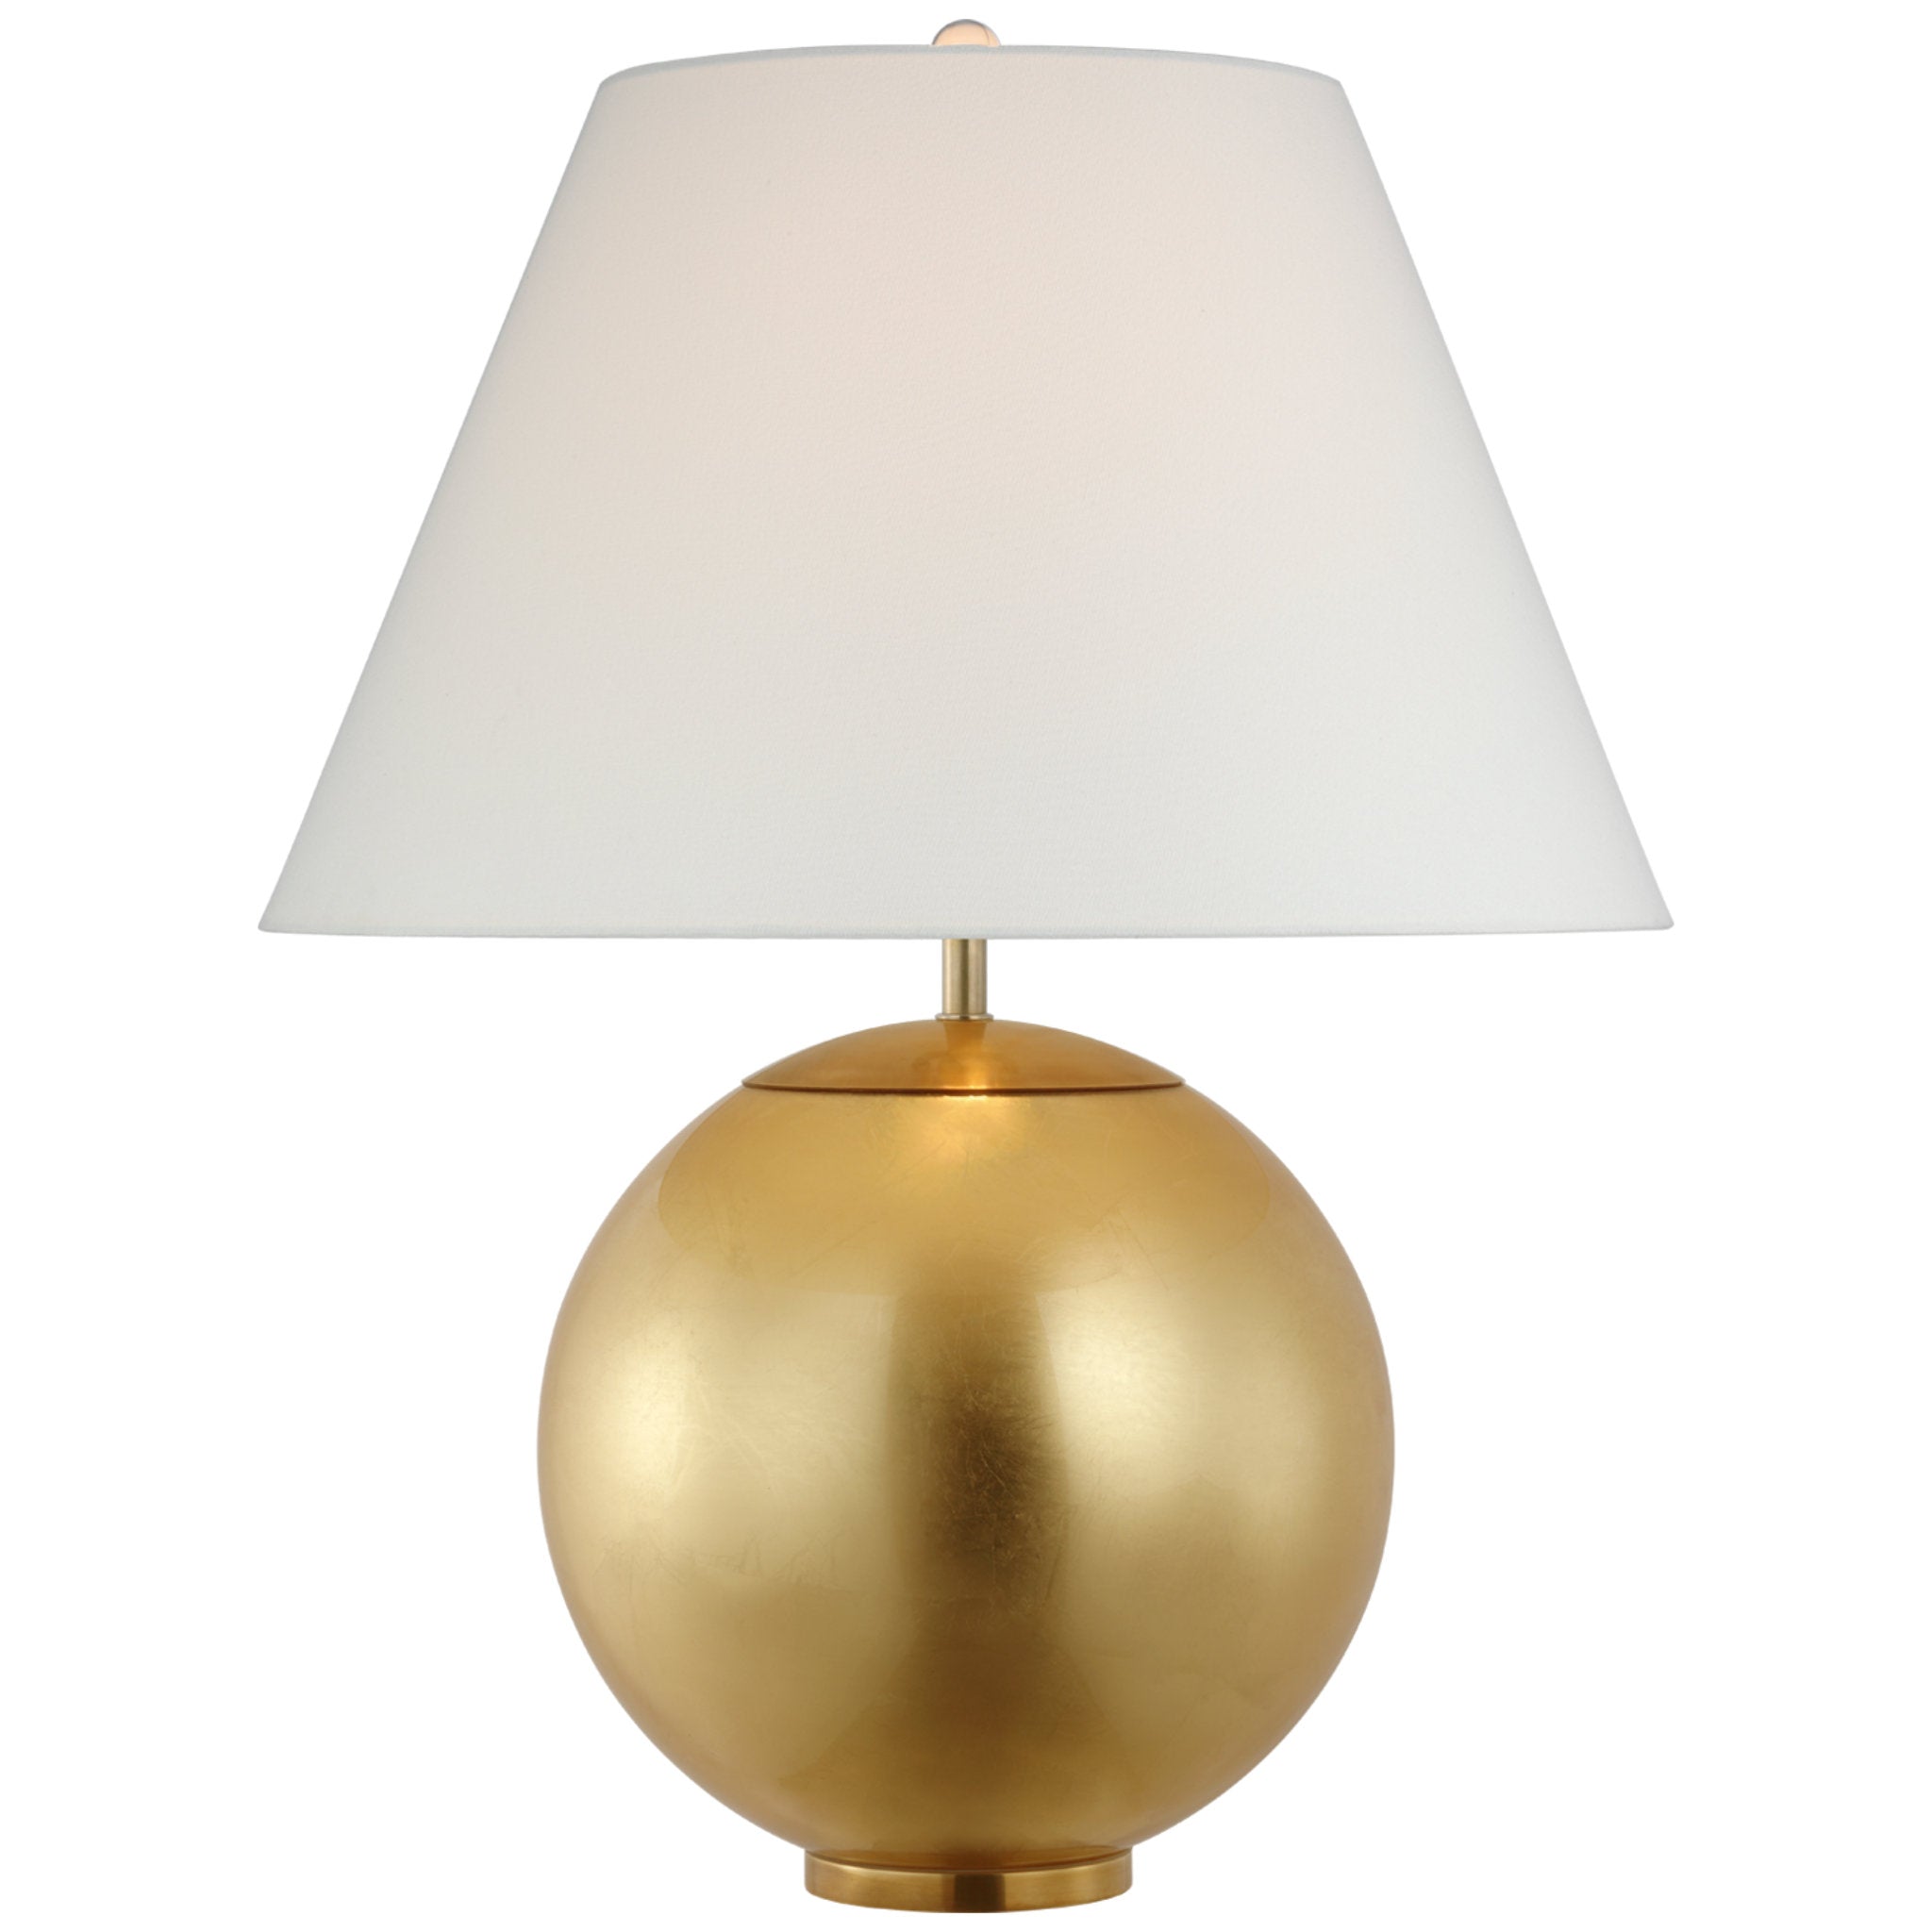 AERIN Morton Large Table Lamp in Gild with Linen Shade